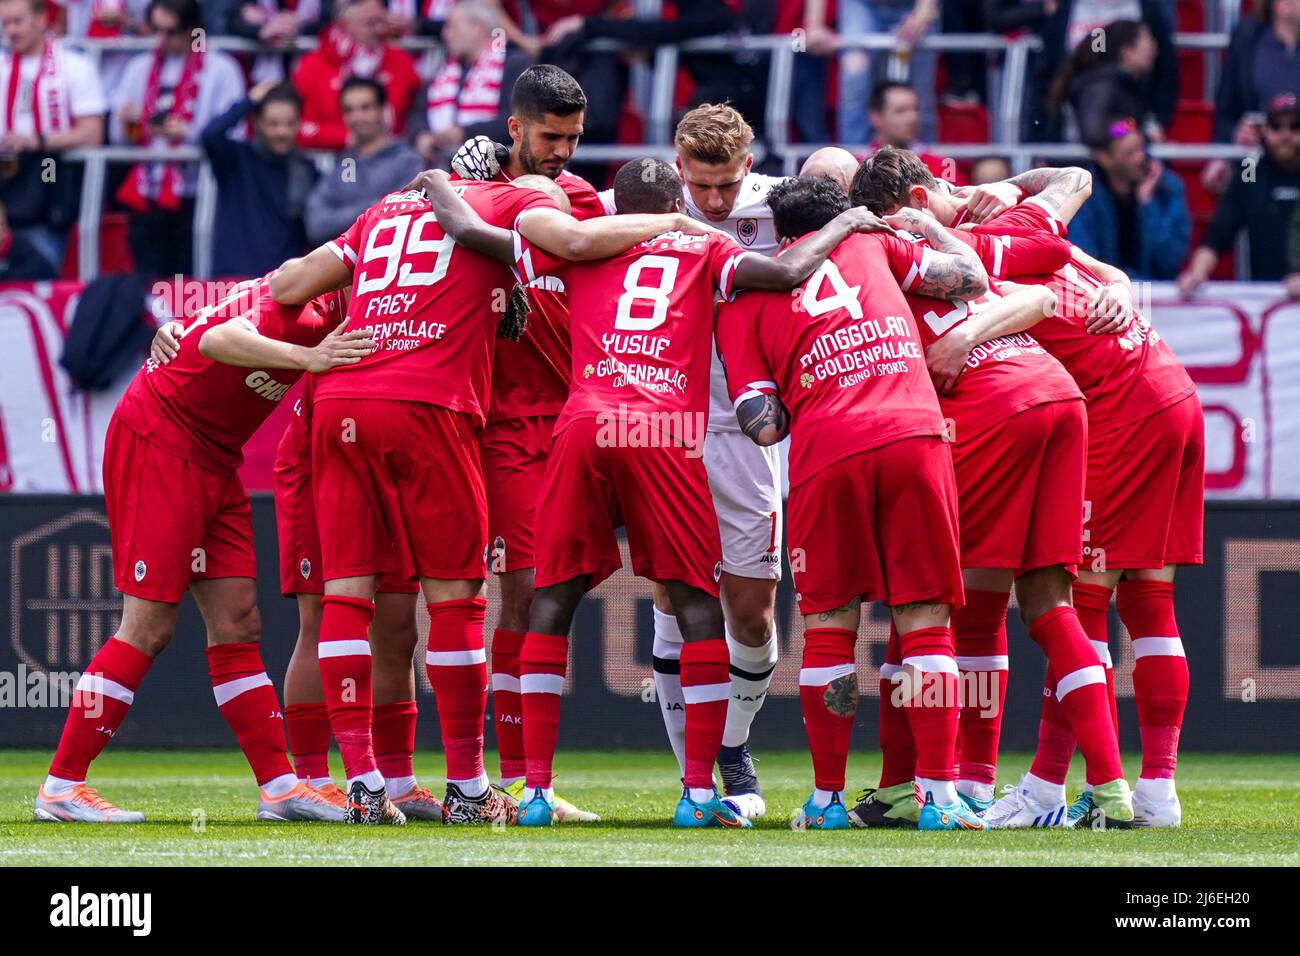 ANTWERPEN, BELGIUM - MAY 1: Royal Antwerp FC players prior to the Jupiler  Pro League - Championship Round match between Royal Antwerp FC and Royale  Union Saint-Gilloise at Bosuilstadion on May 1,